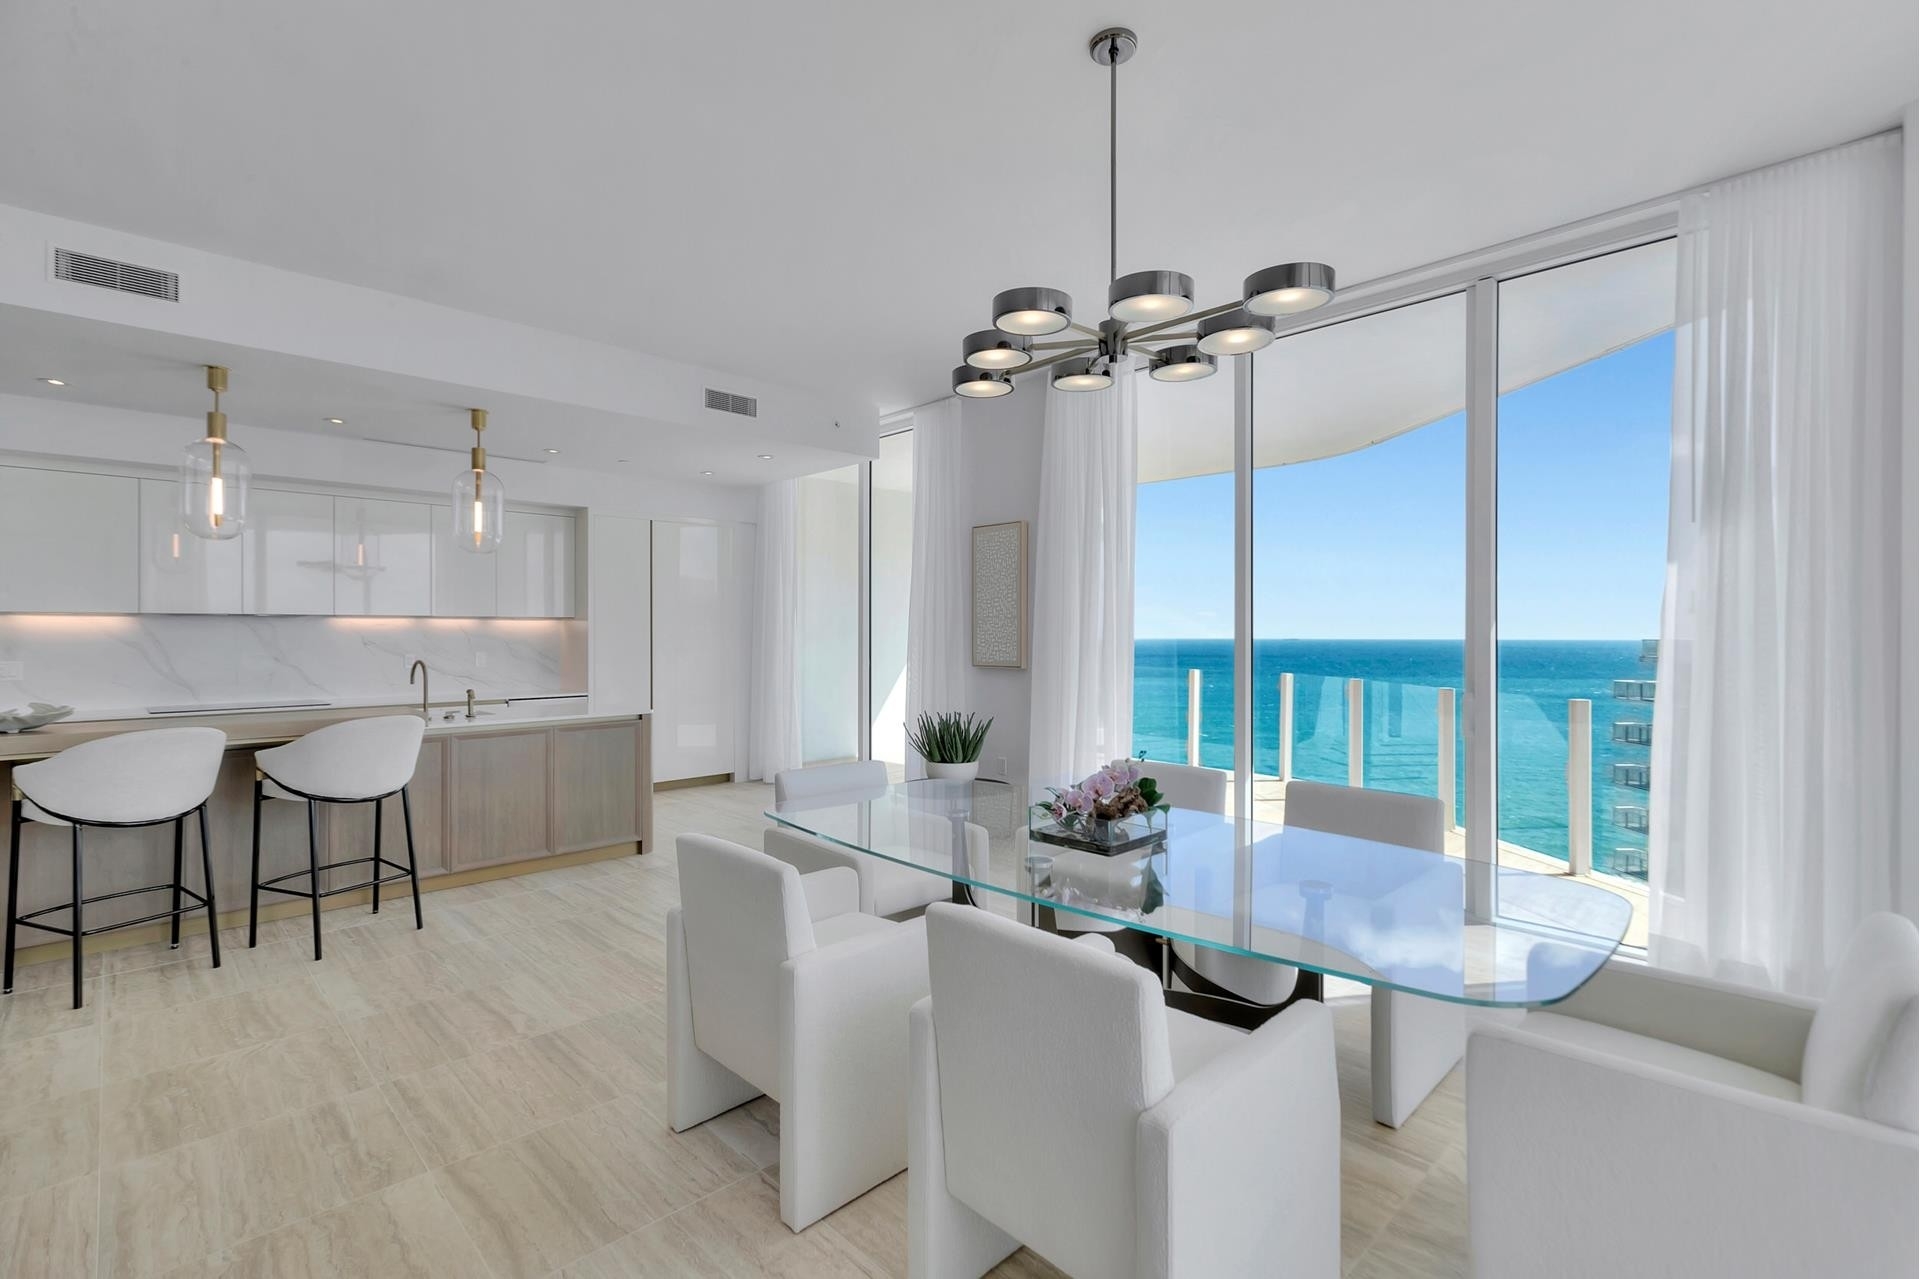 Property at 525 N Ft Lauderdale Bch Blvd, 1903 Central Beach, Fort Lauderdale, FL 33304